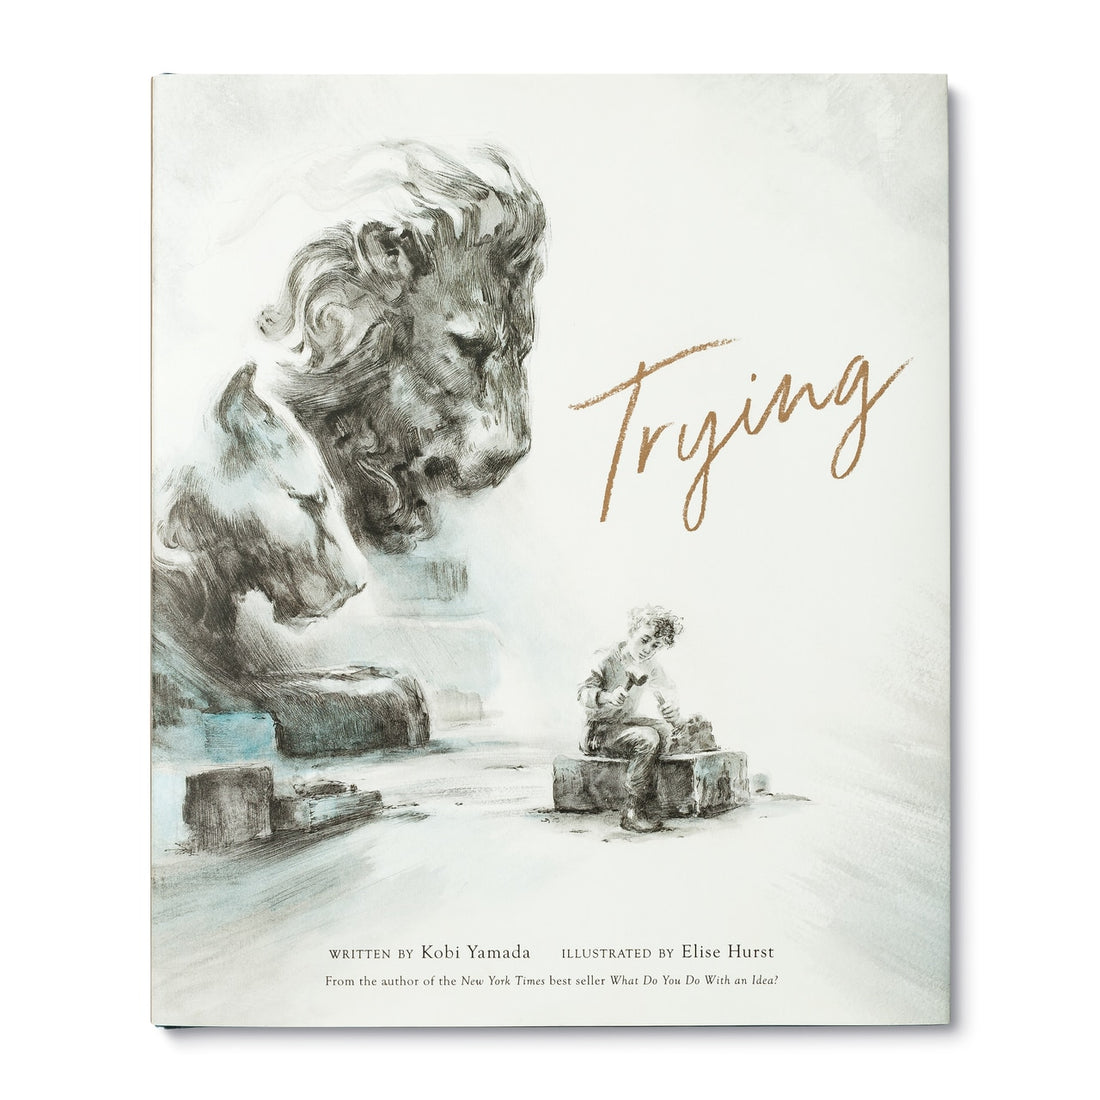 Book cover illustration showing a lion statue with a small child sitting nearby, depicted in black-and-white illustrations, and the title &quot;Trying&quot; by Compendium written in cursive.